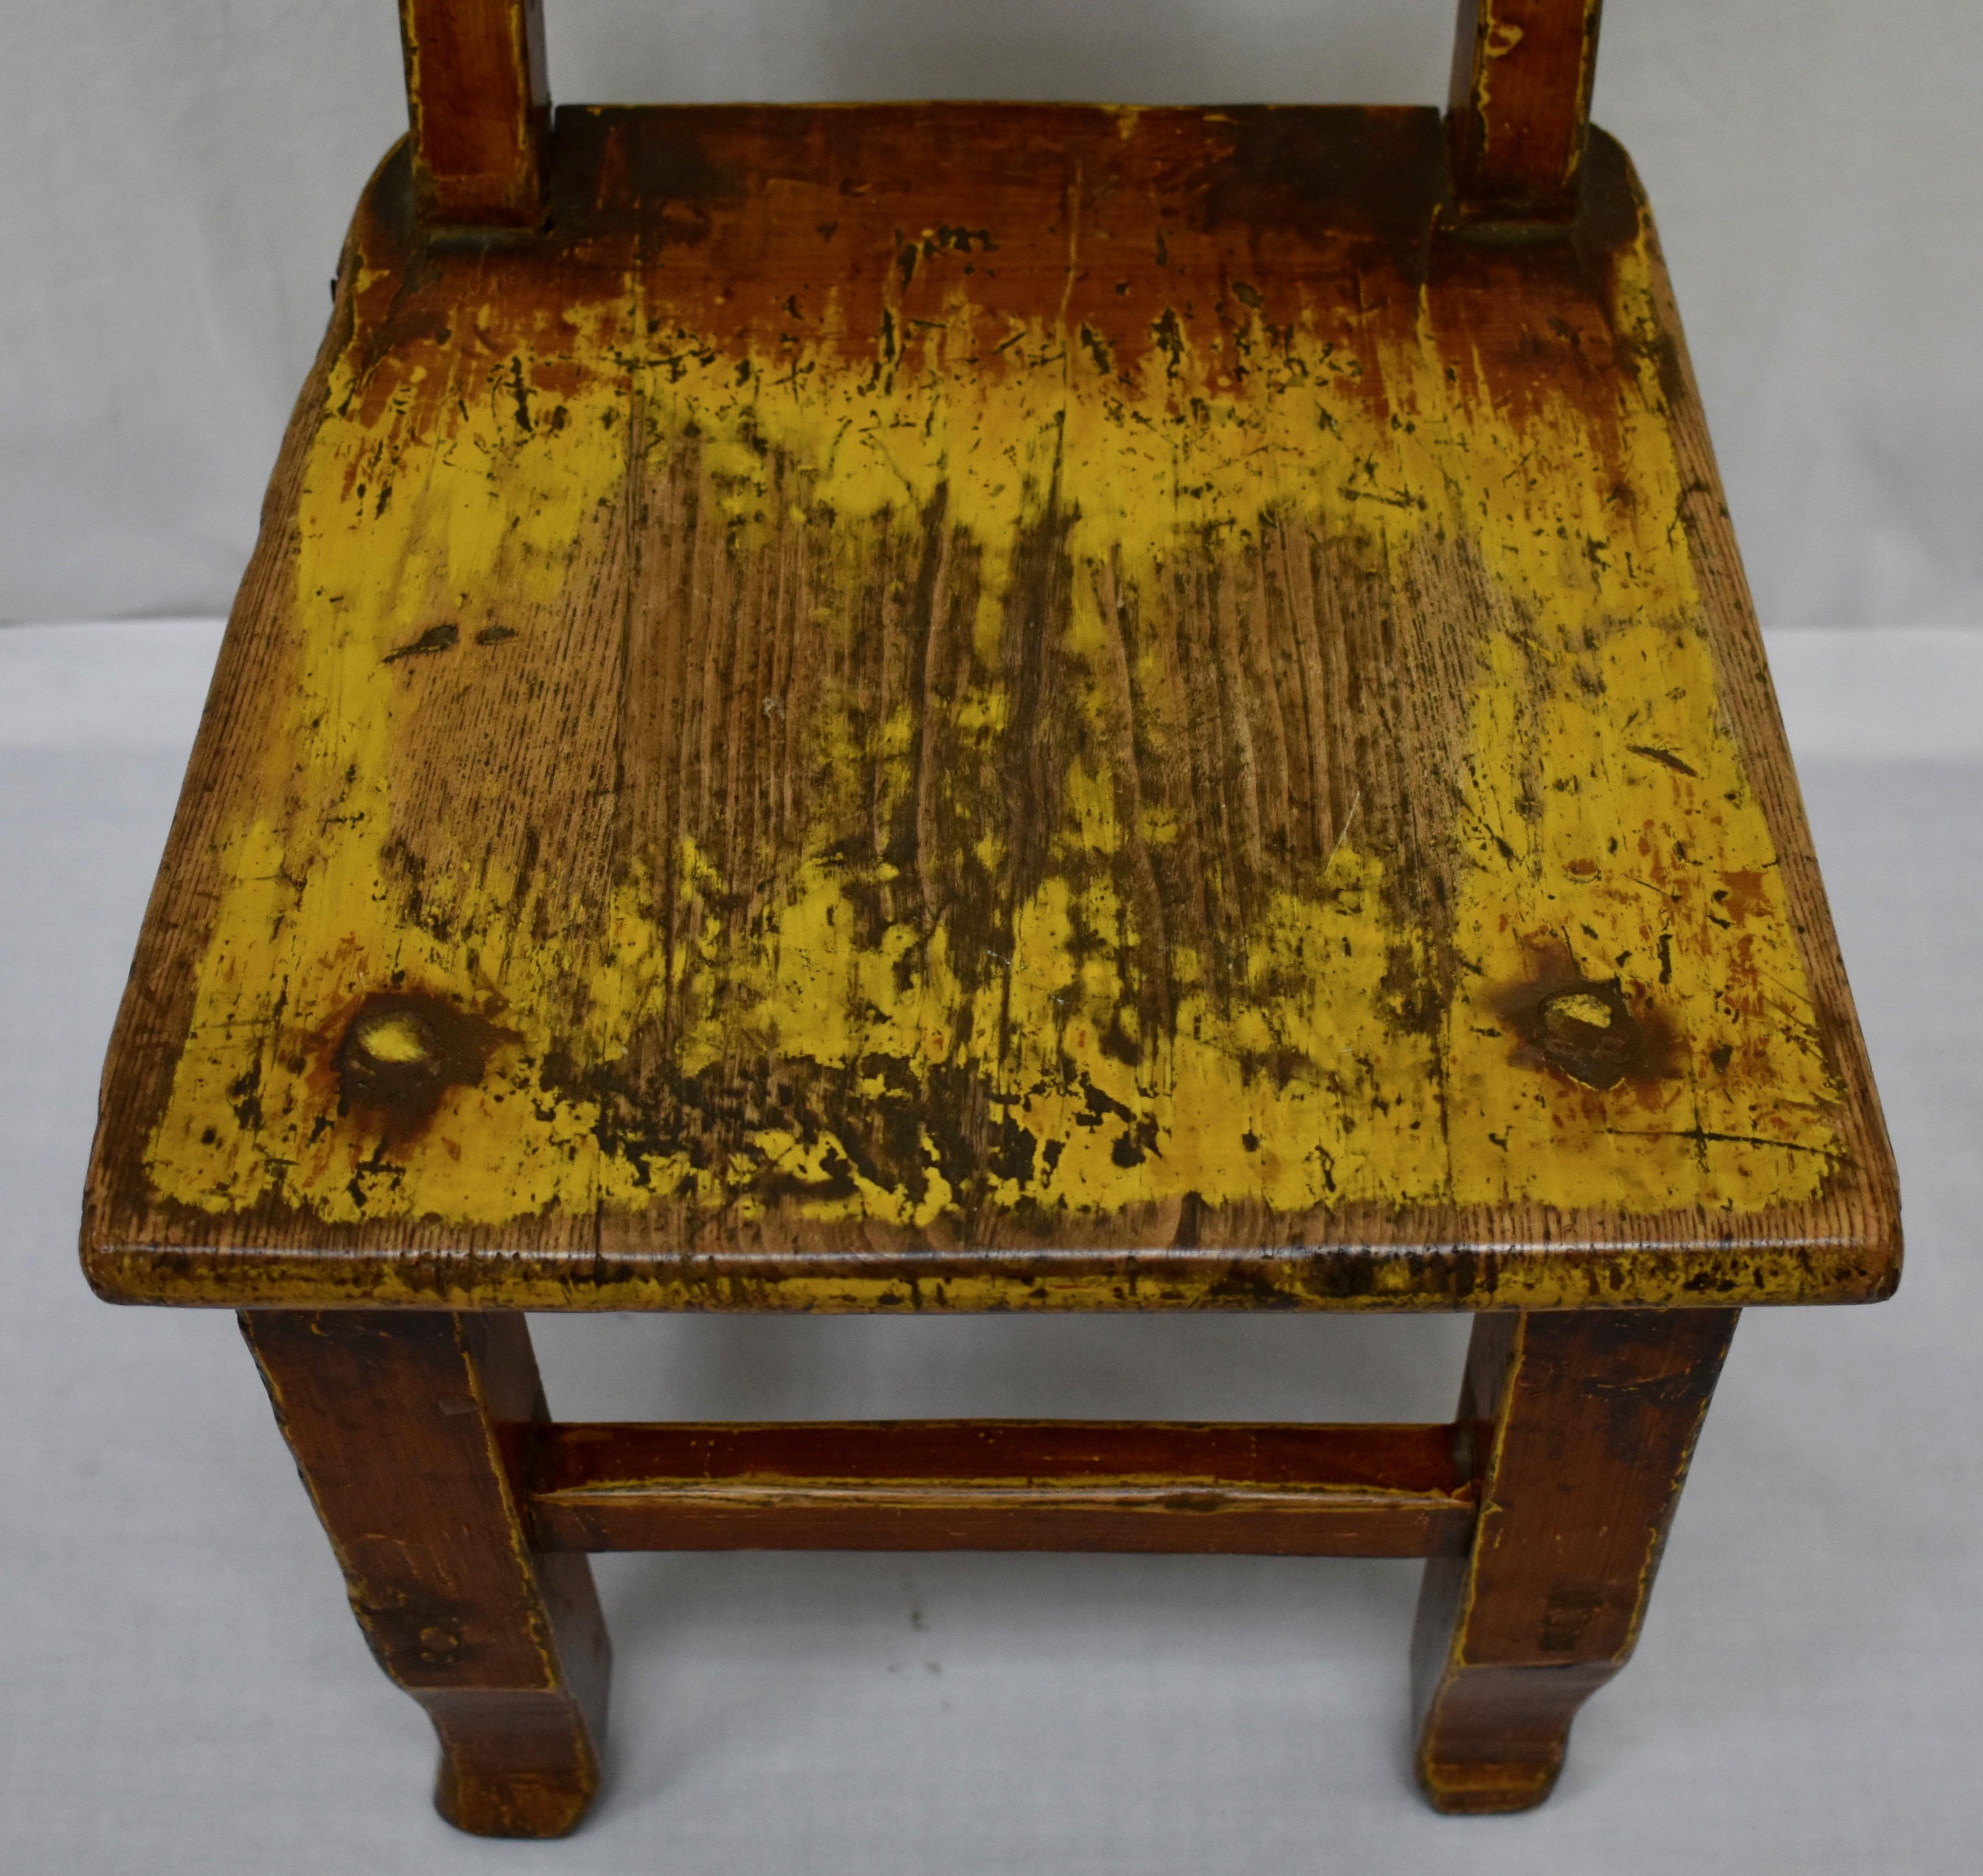 Hungarian Painted Oak Plank-Seat Child's Chair